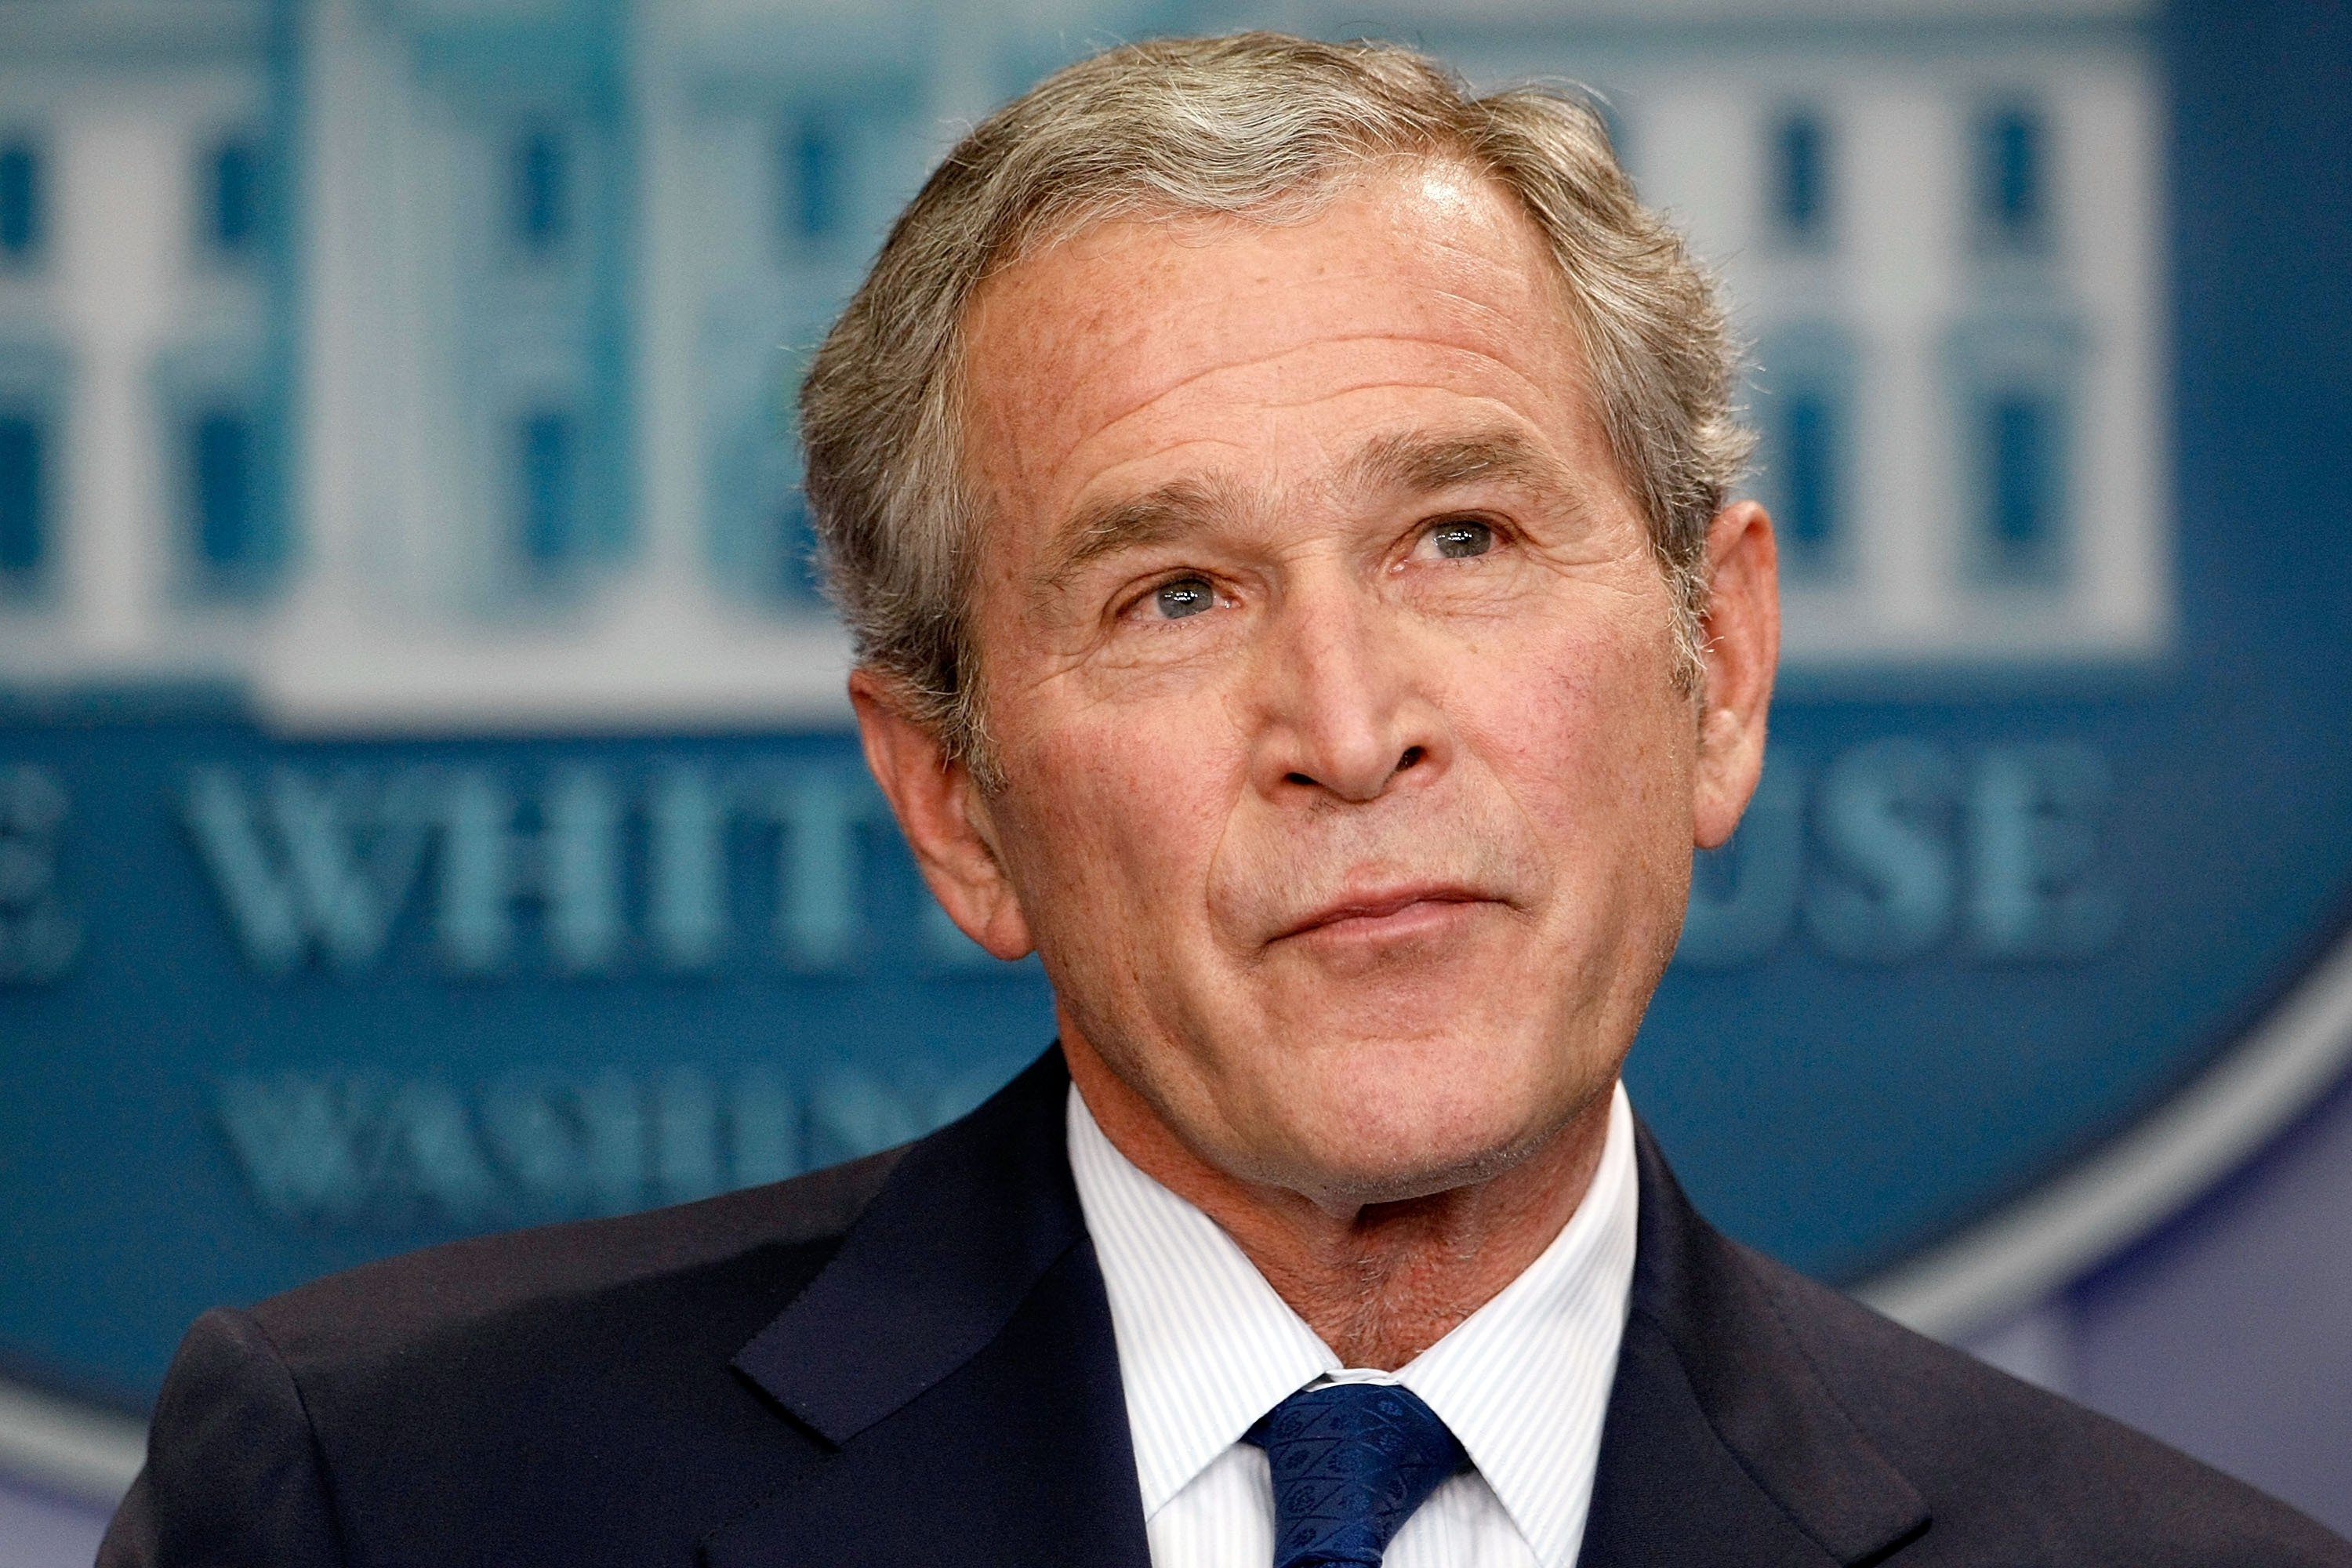 Then U.S. President George W. Bush holds a news conference in the Brady Press Briefing Room at the White House, Washington, U.S., Jan. 12, 2009. (Getty Images)